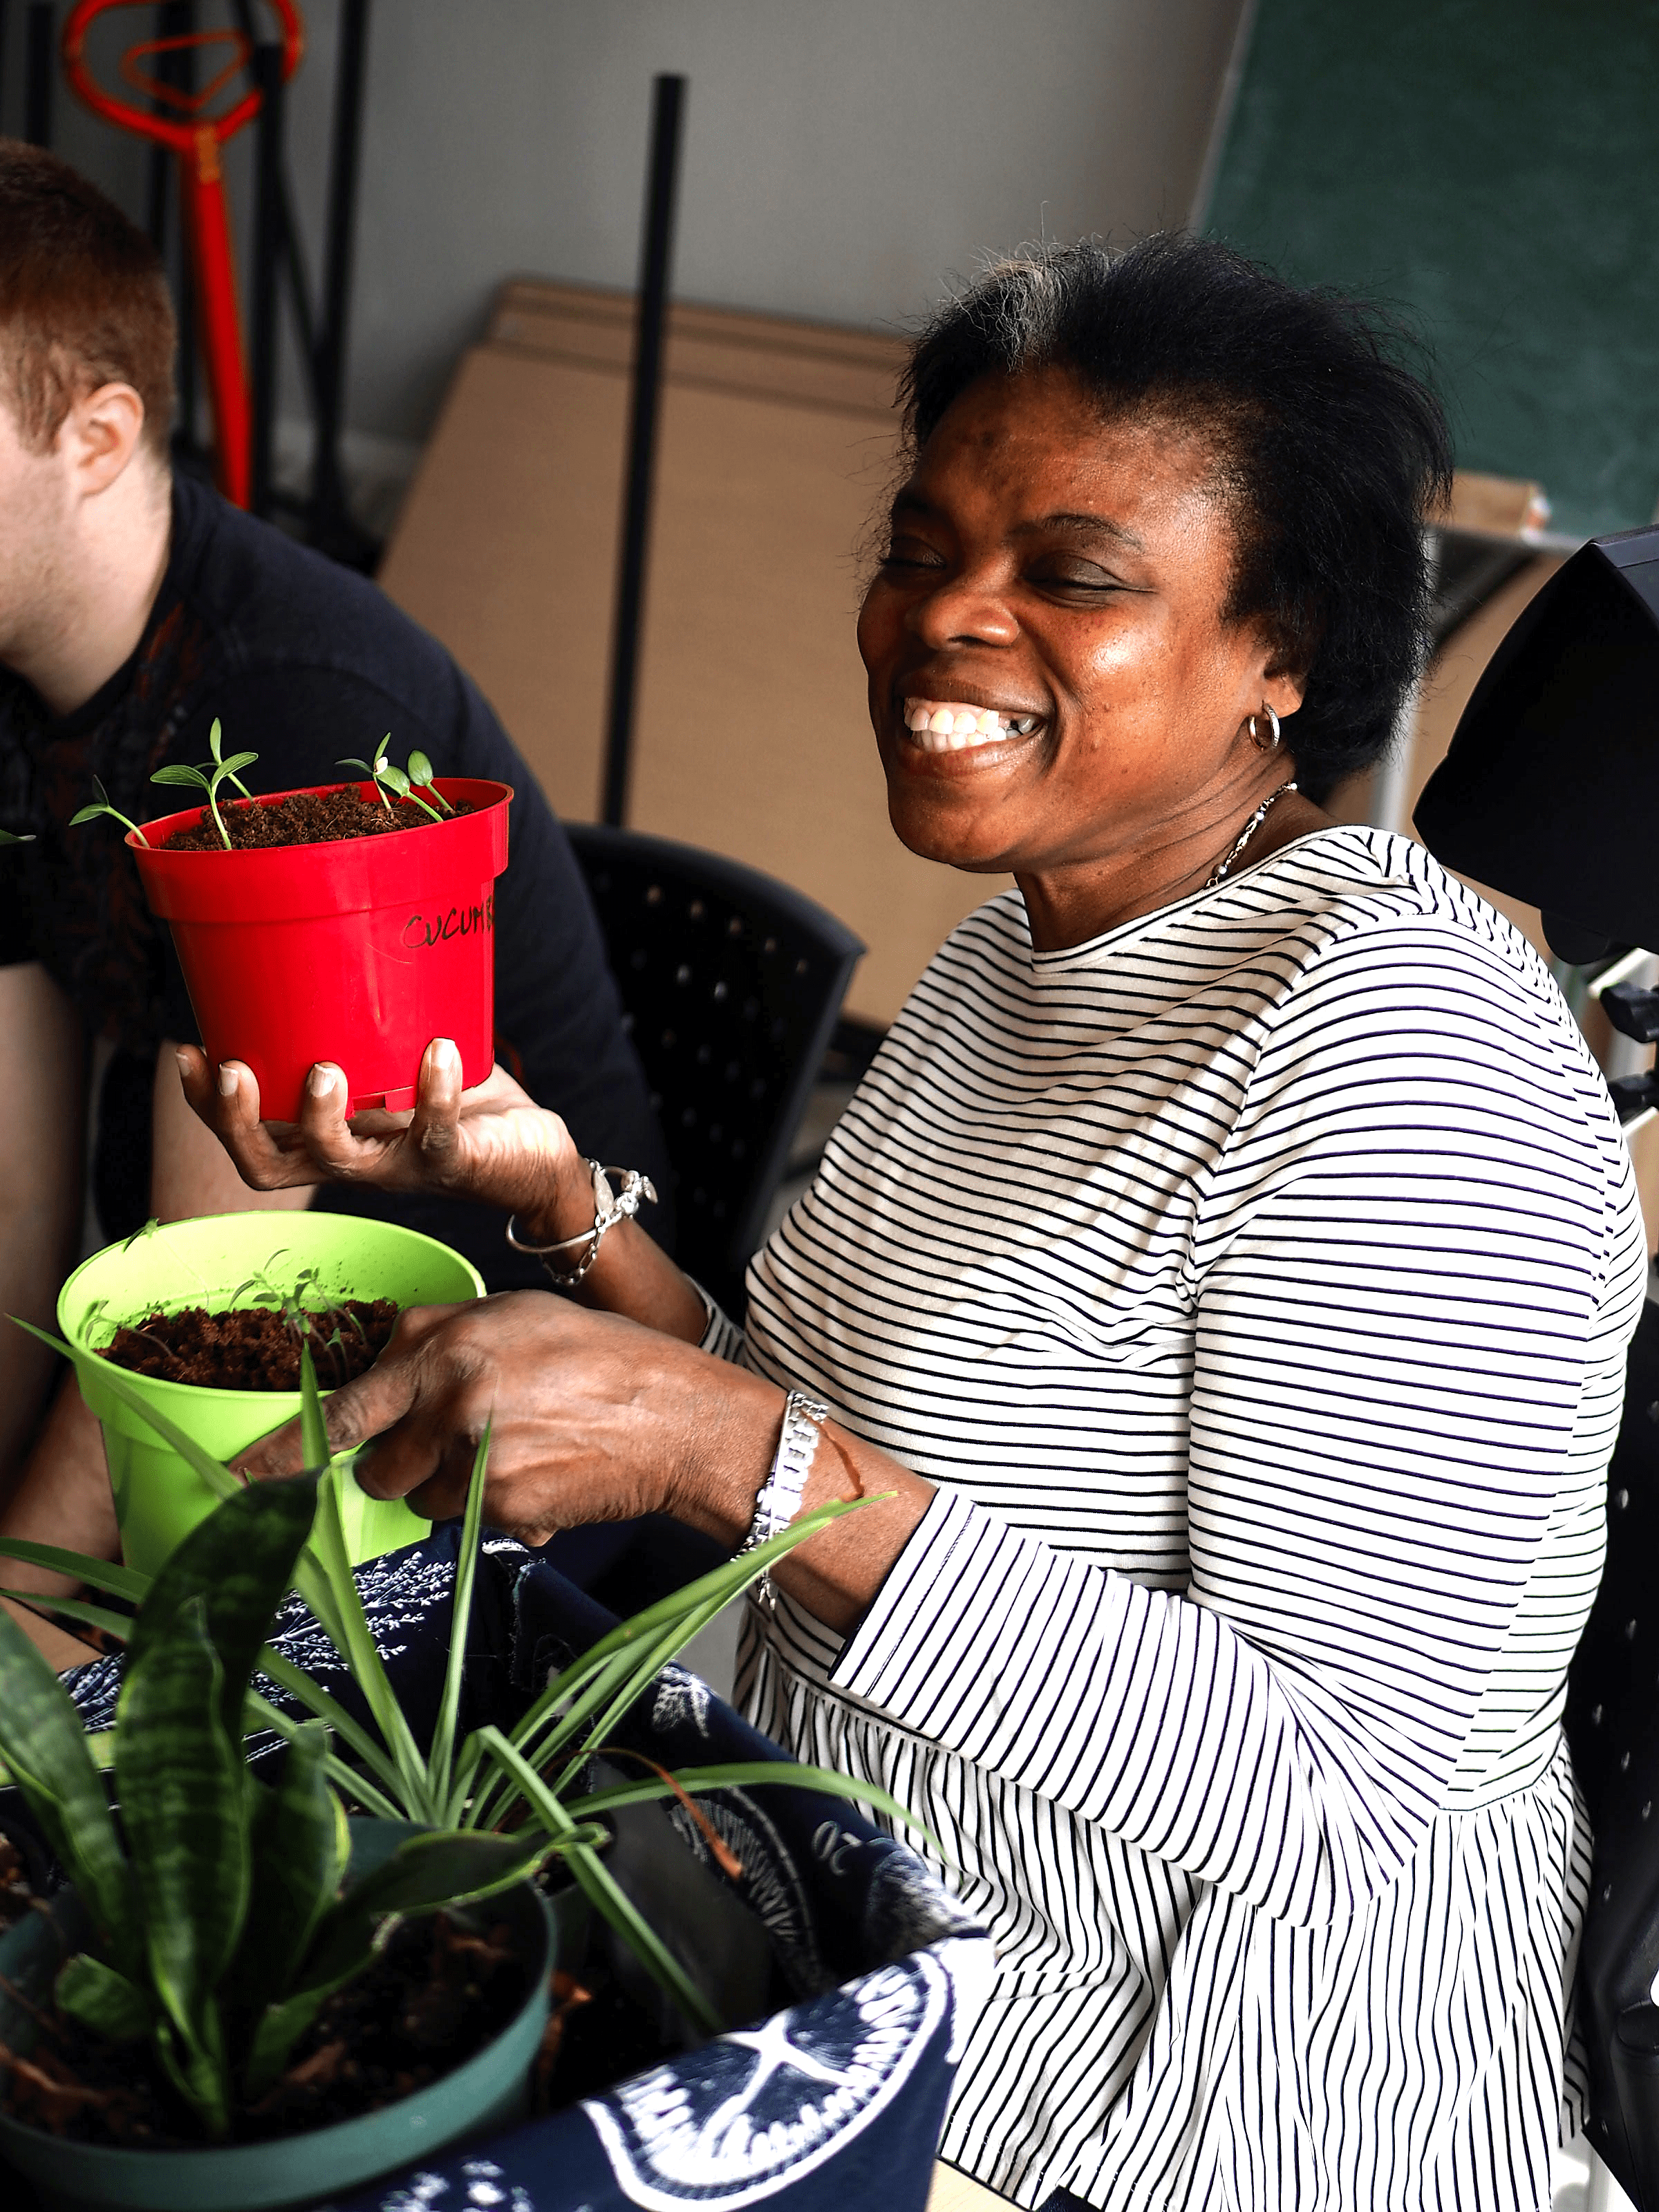 A woman is holding two potted plants and smiling. There is a third potted plant beside her.